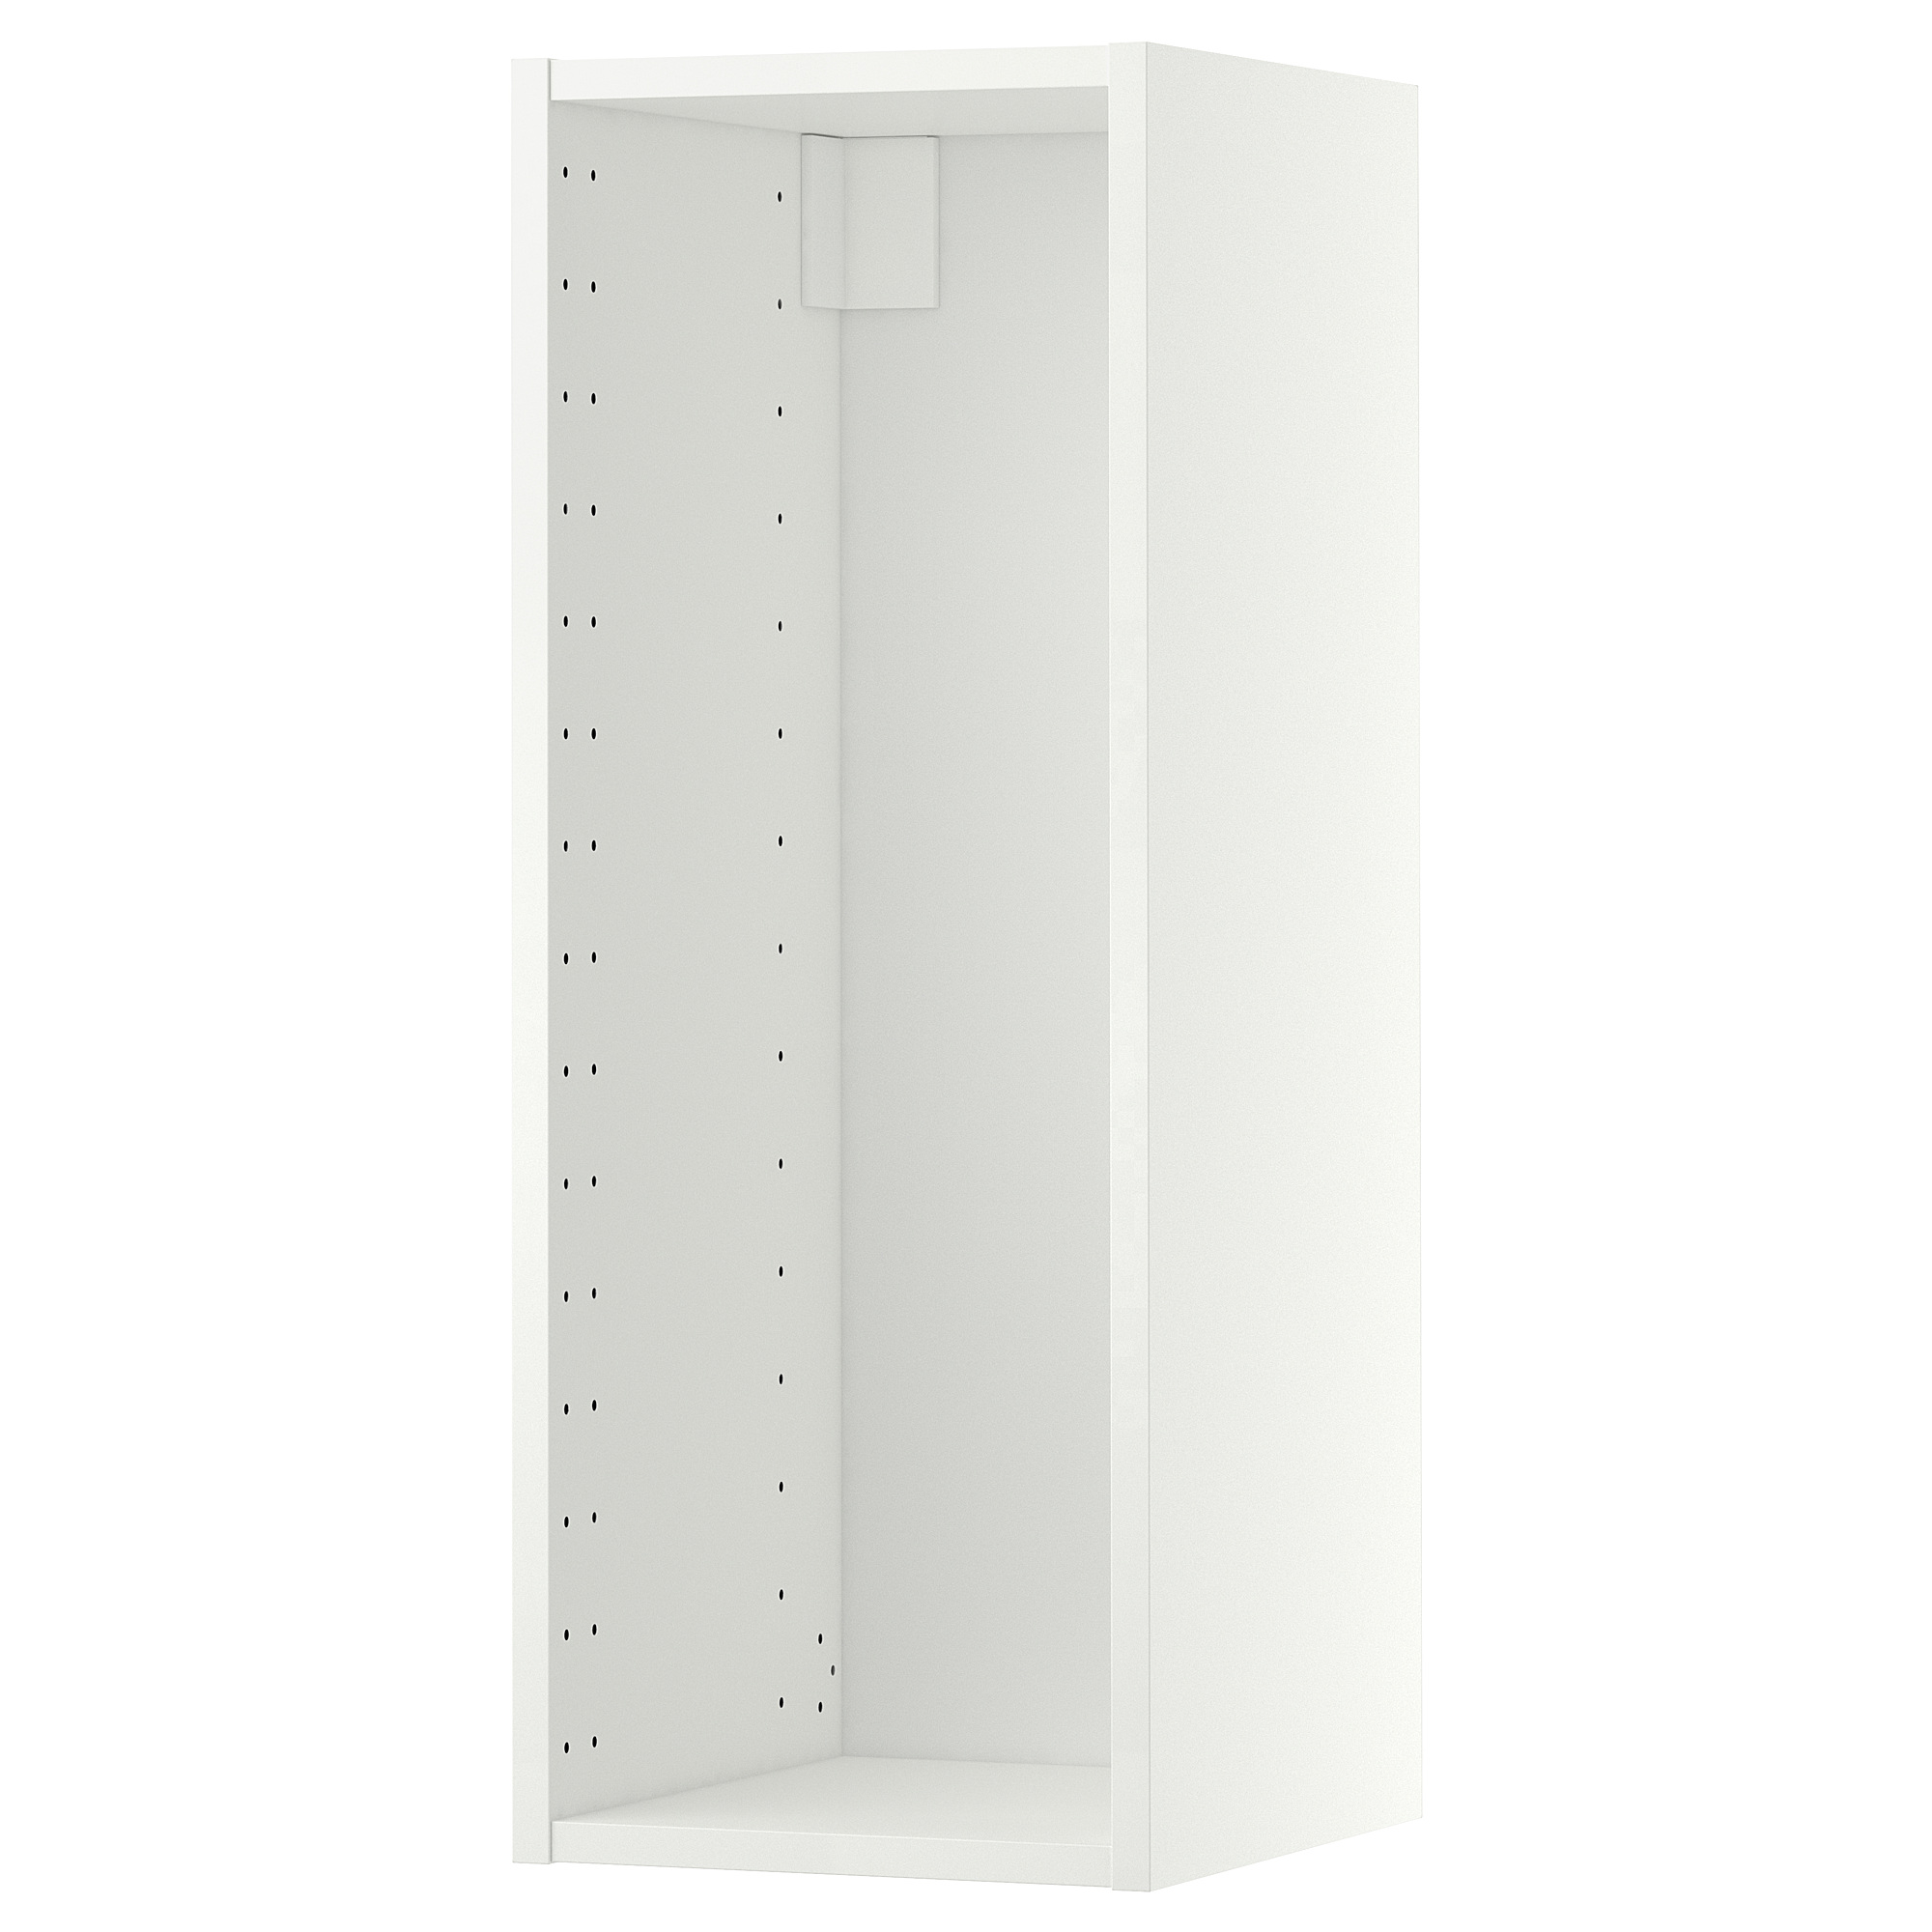 METOD wall cabinet frame